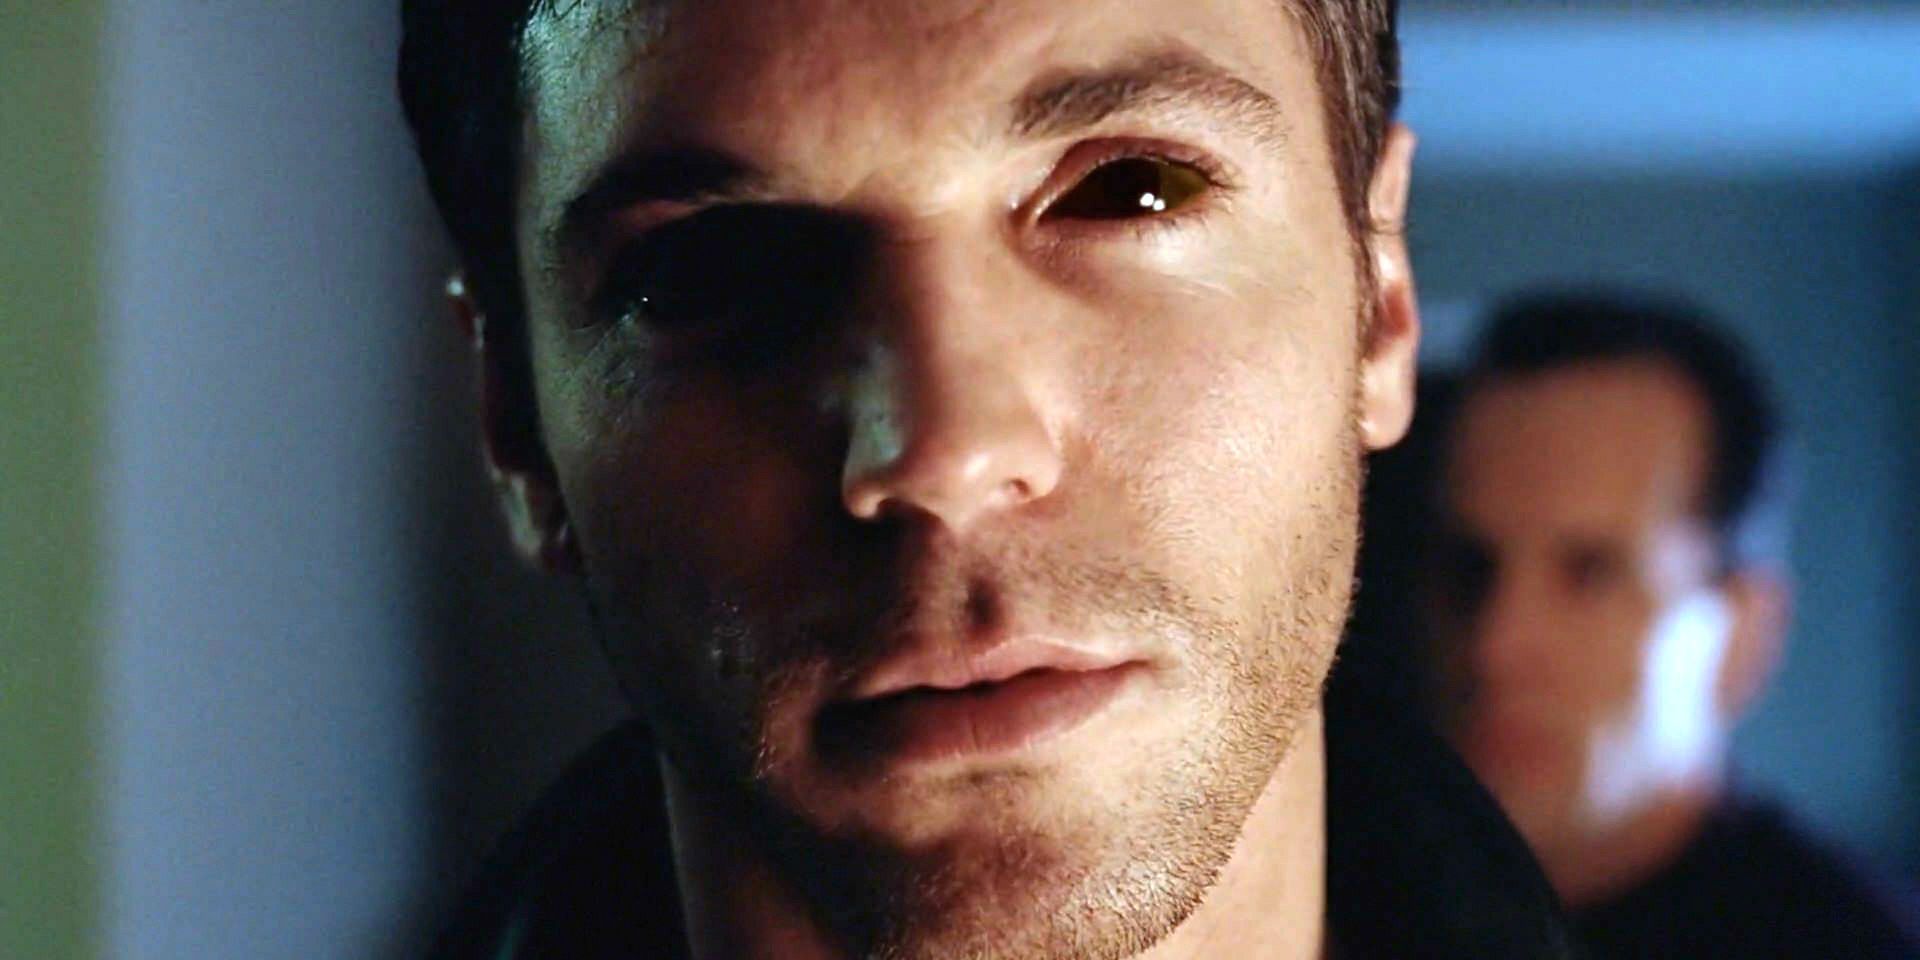 This image shows Black Oil eyes caused by Purity on the character Krycek.